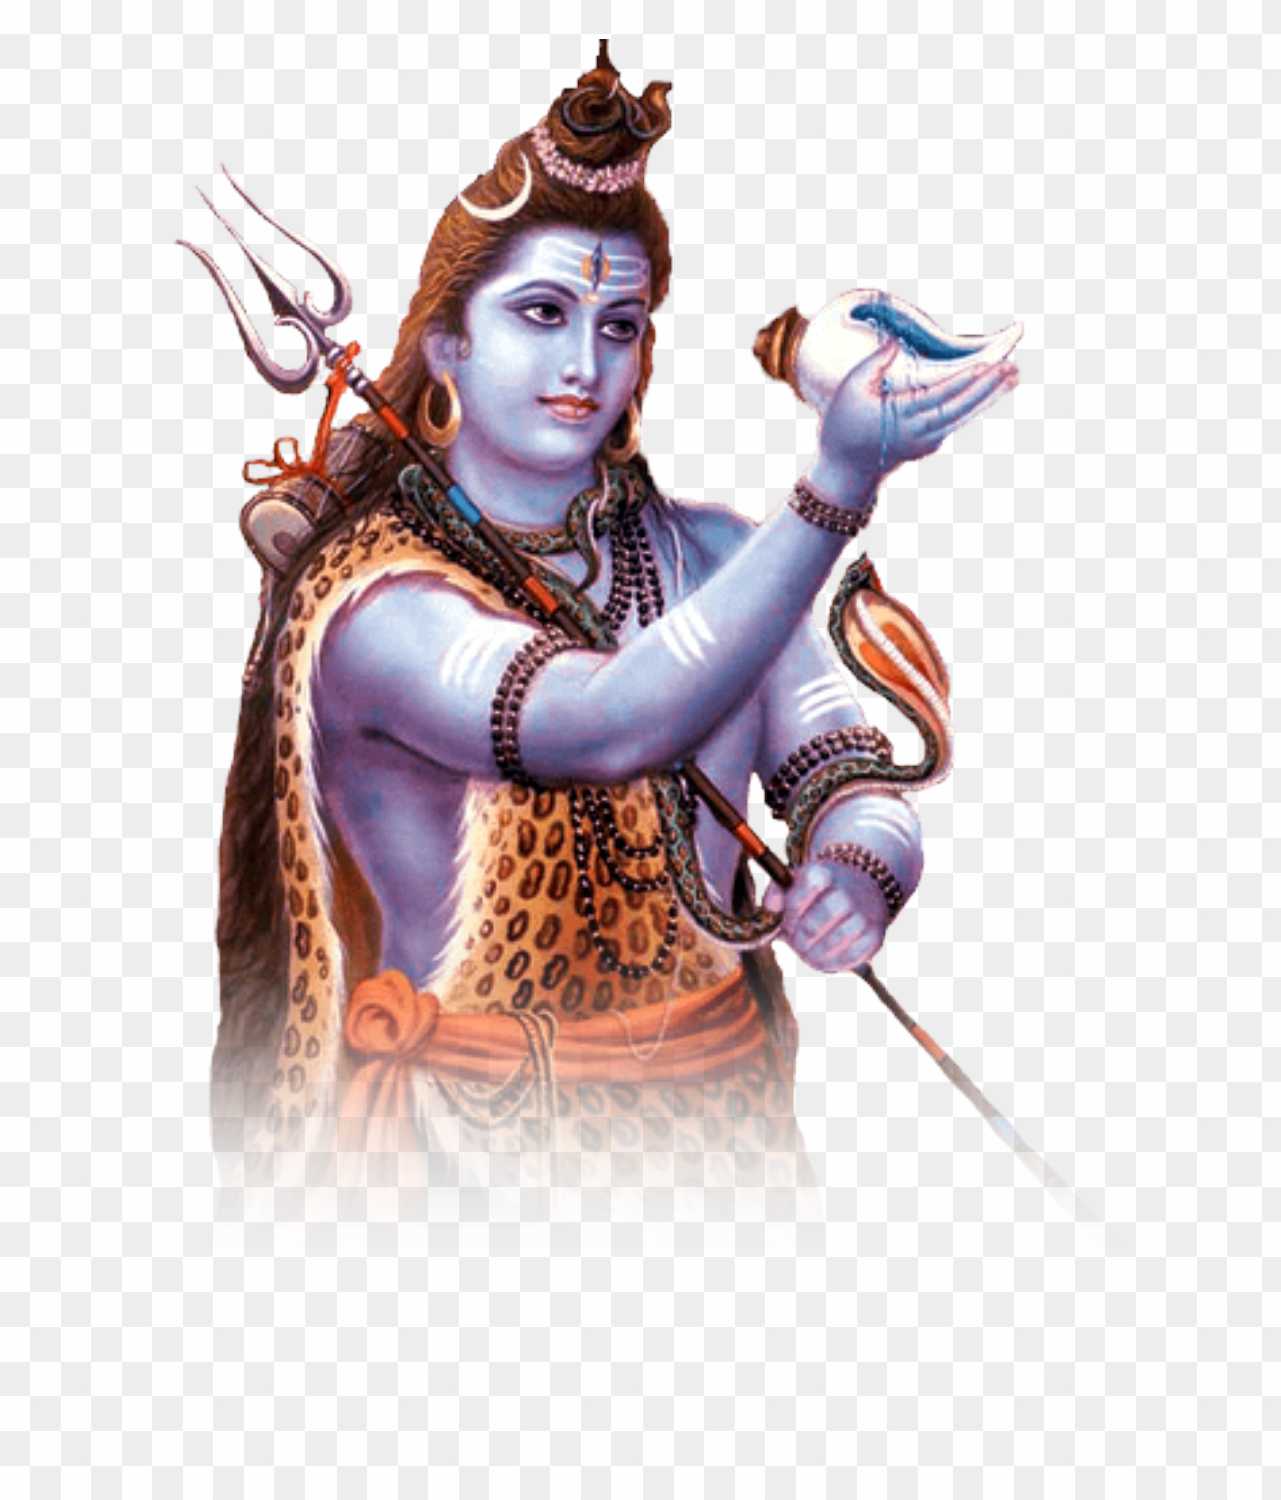 Shiva PNG images download